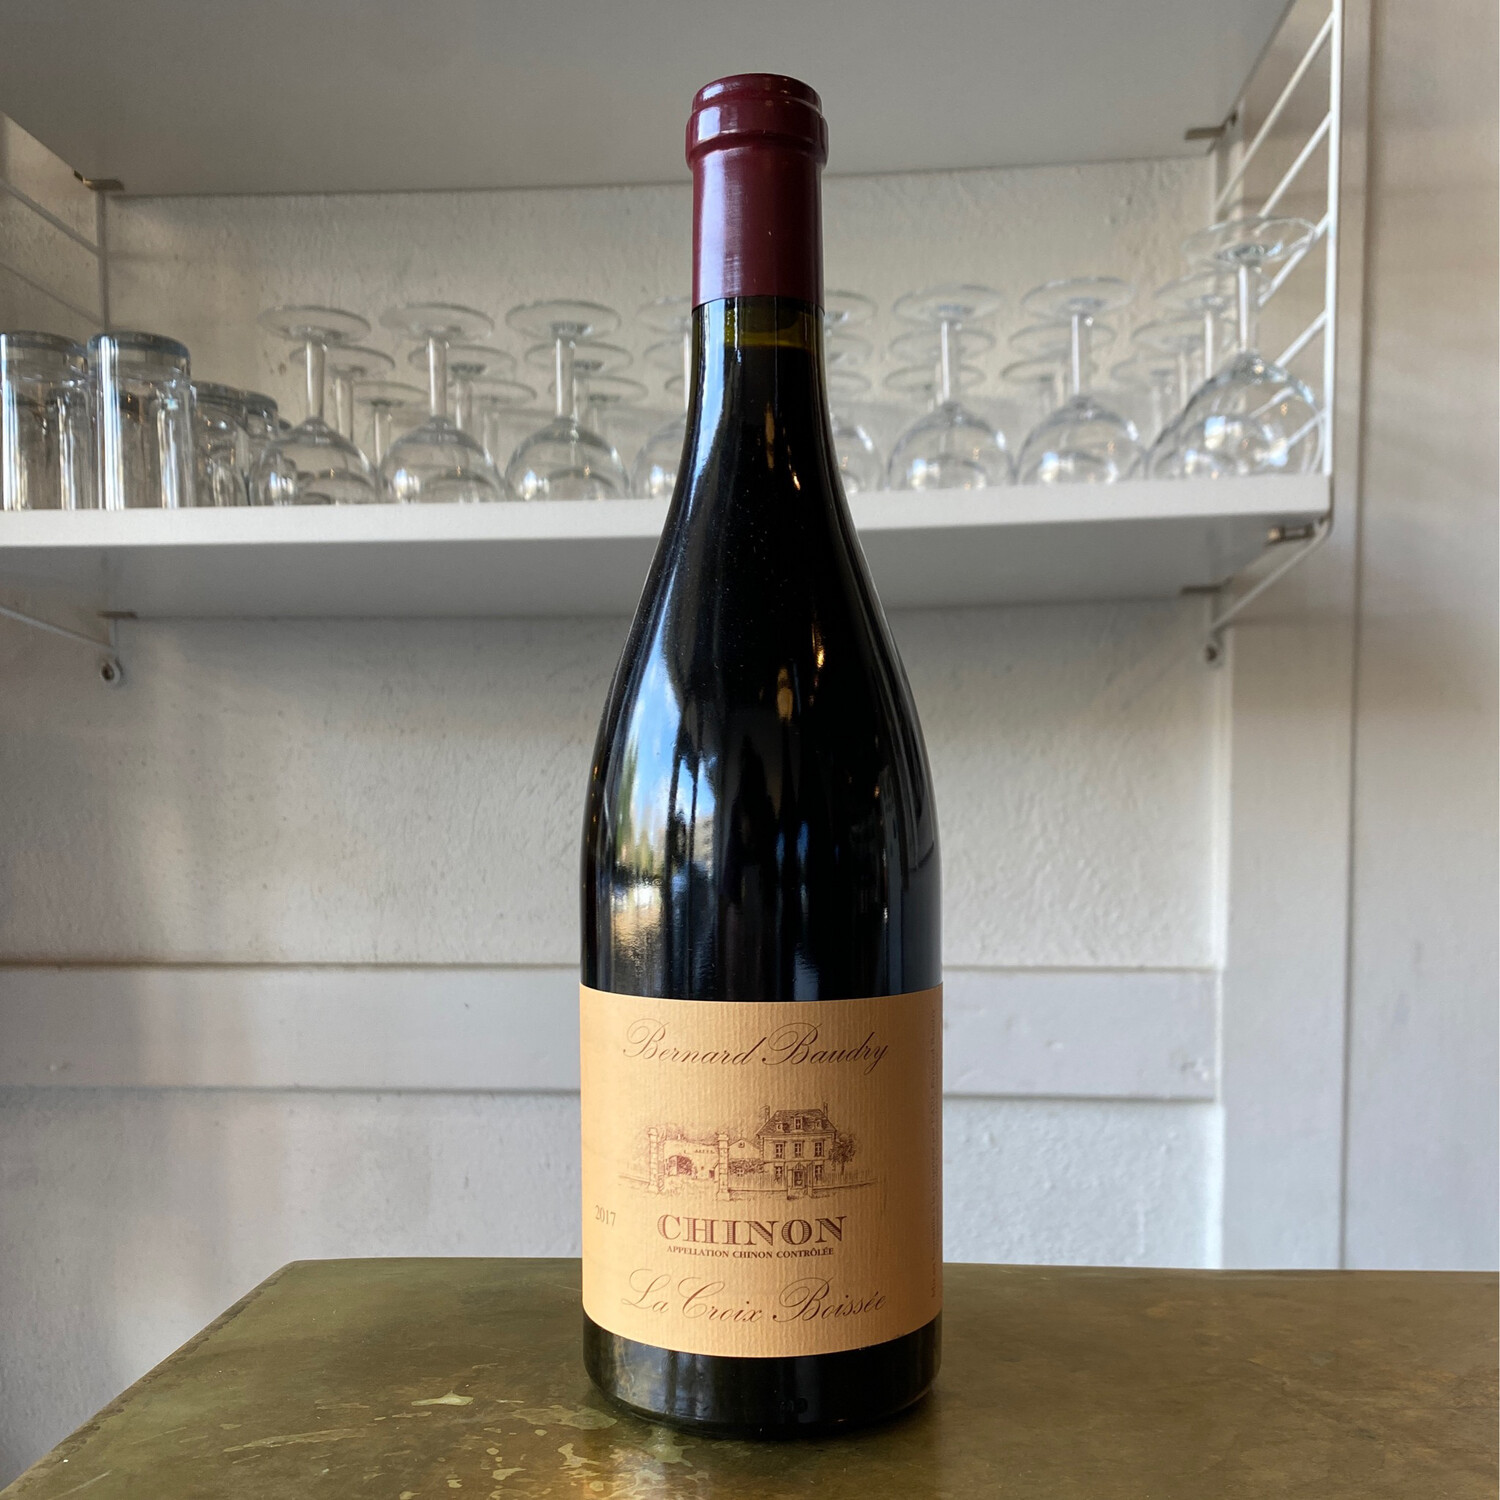 Baudry, Chinon Croix Boissee (2017)